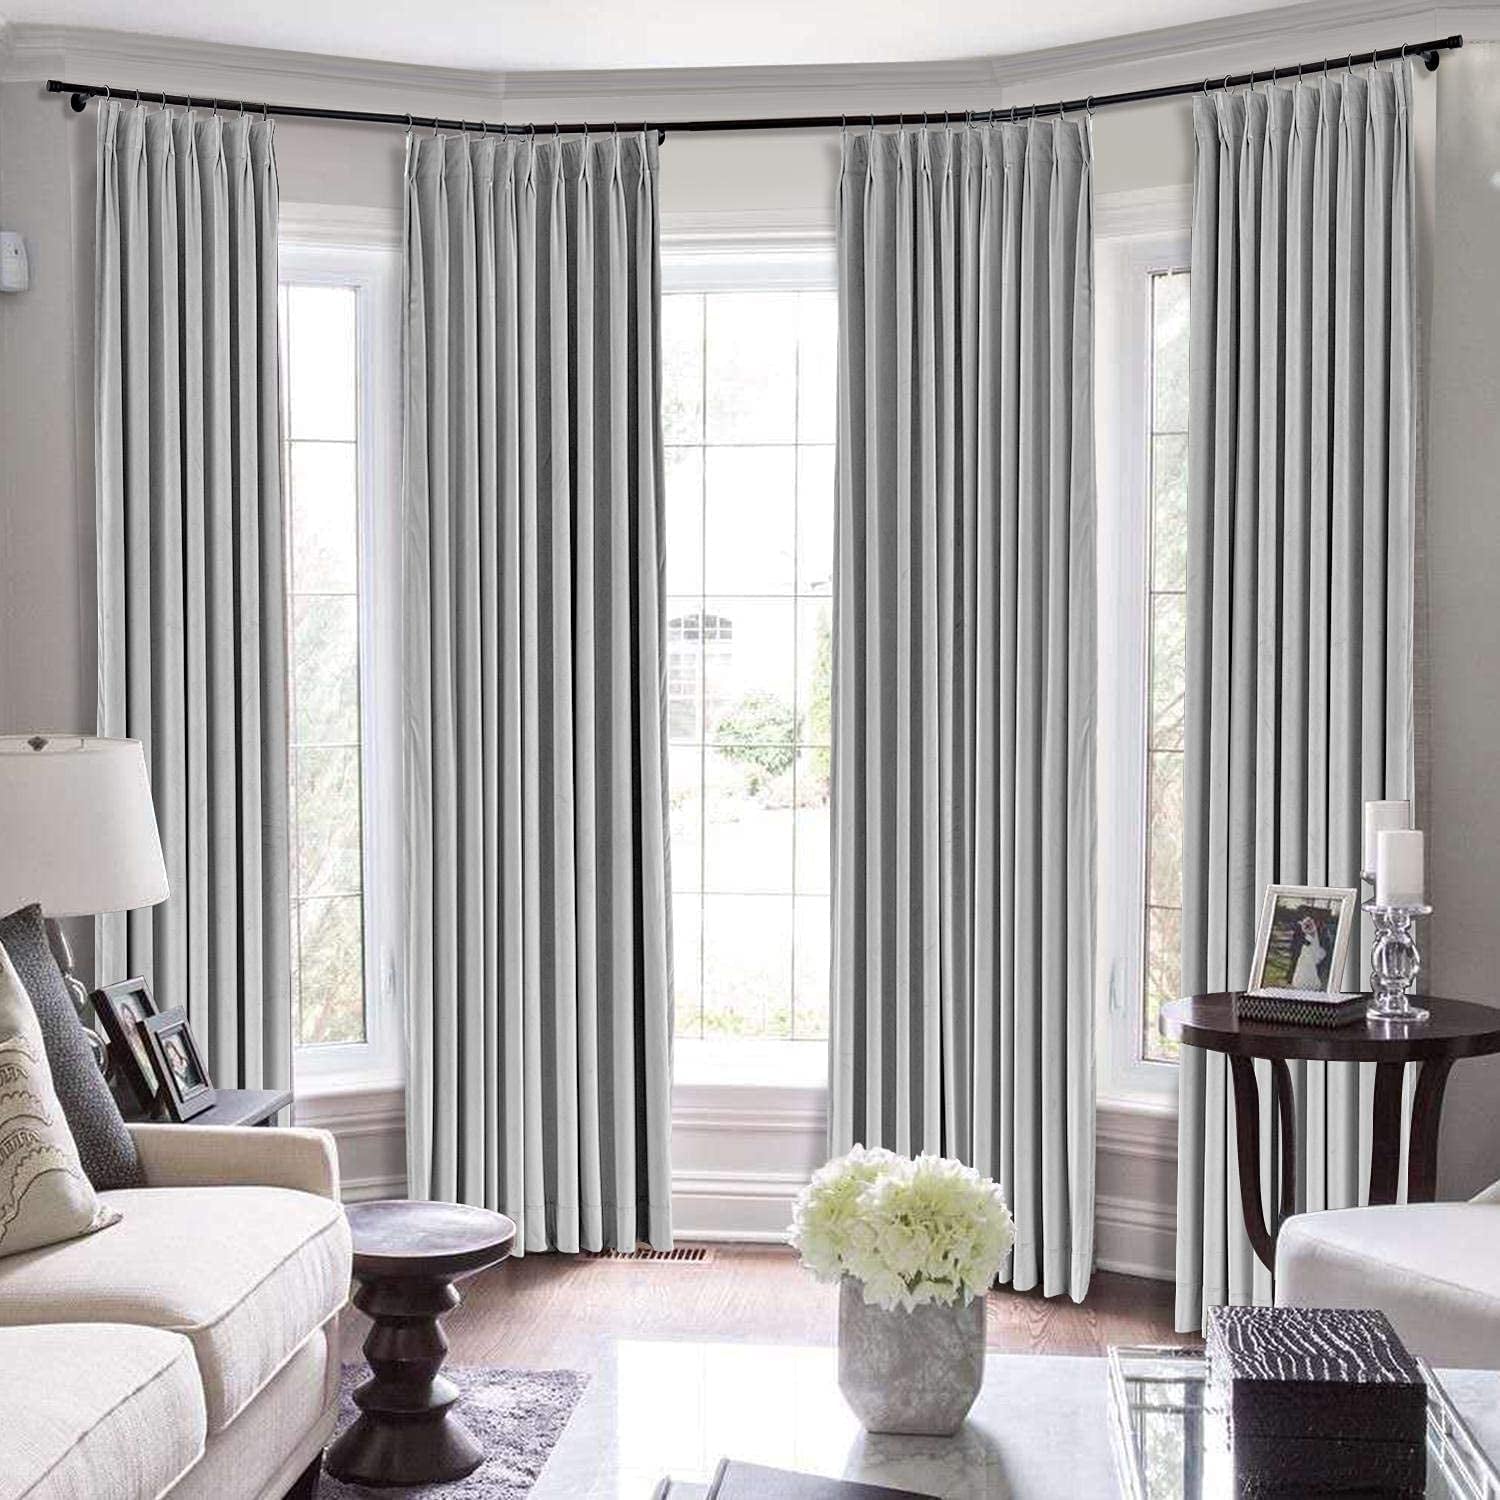 Pinch Pleated blackout 100% Polyester Blend Curtains Room Darkening Curtains Traverse Rod Living Room Bedroom Meetingroom Club Theater Patio Door (1 Panel , 100" W By 72" L) { Silver Grey }